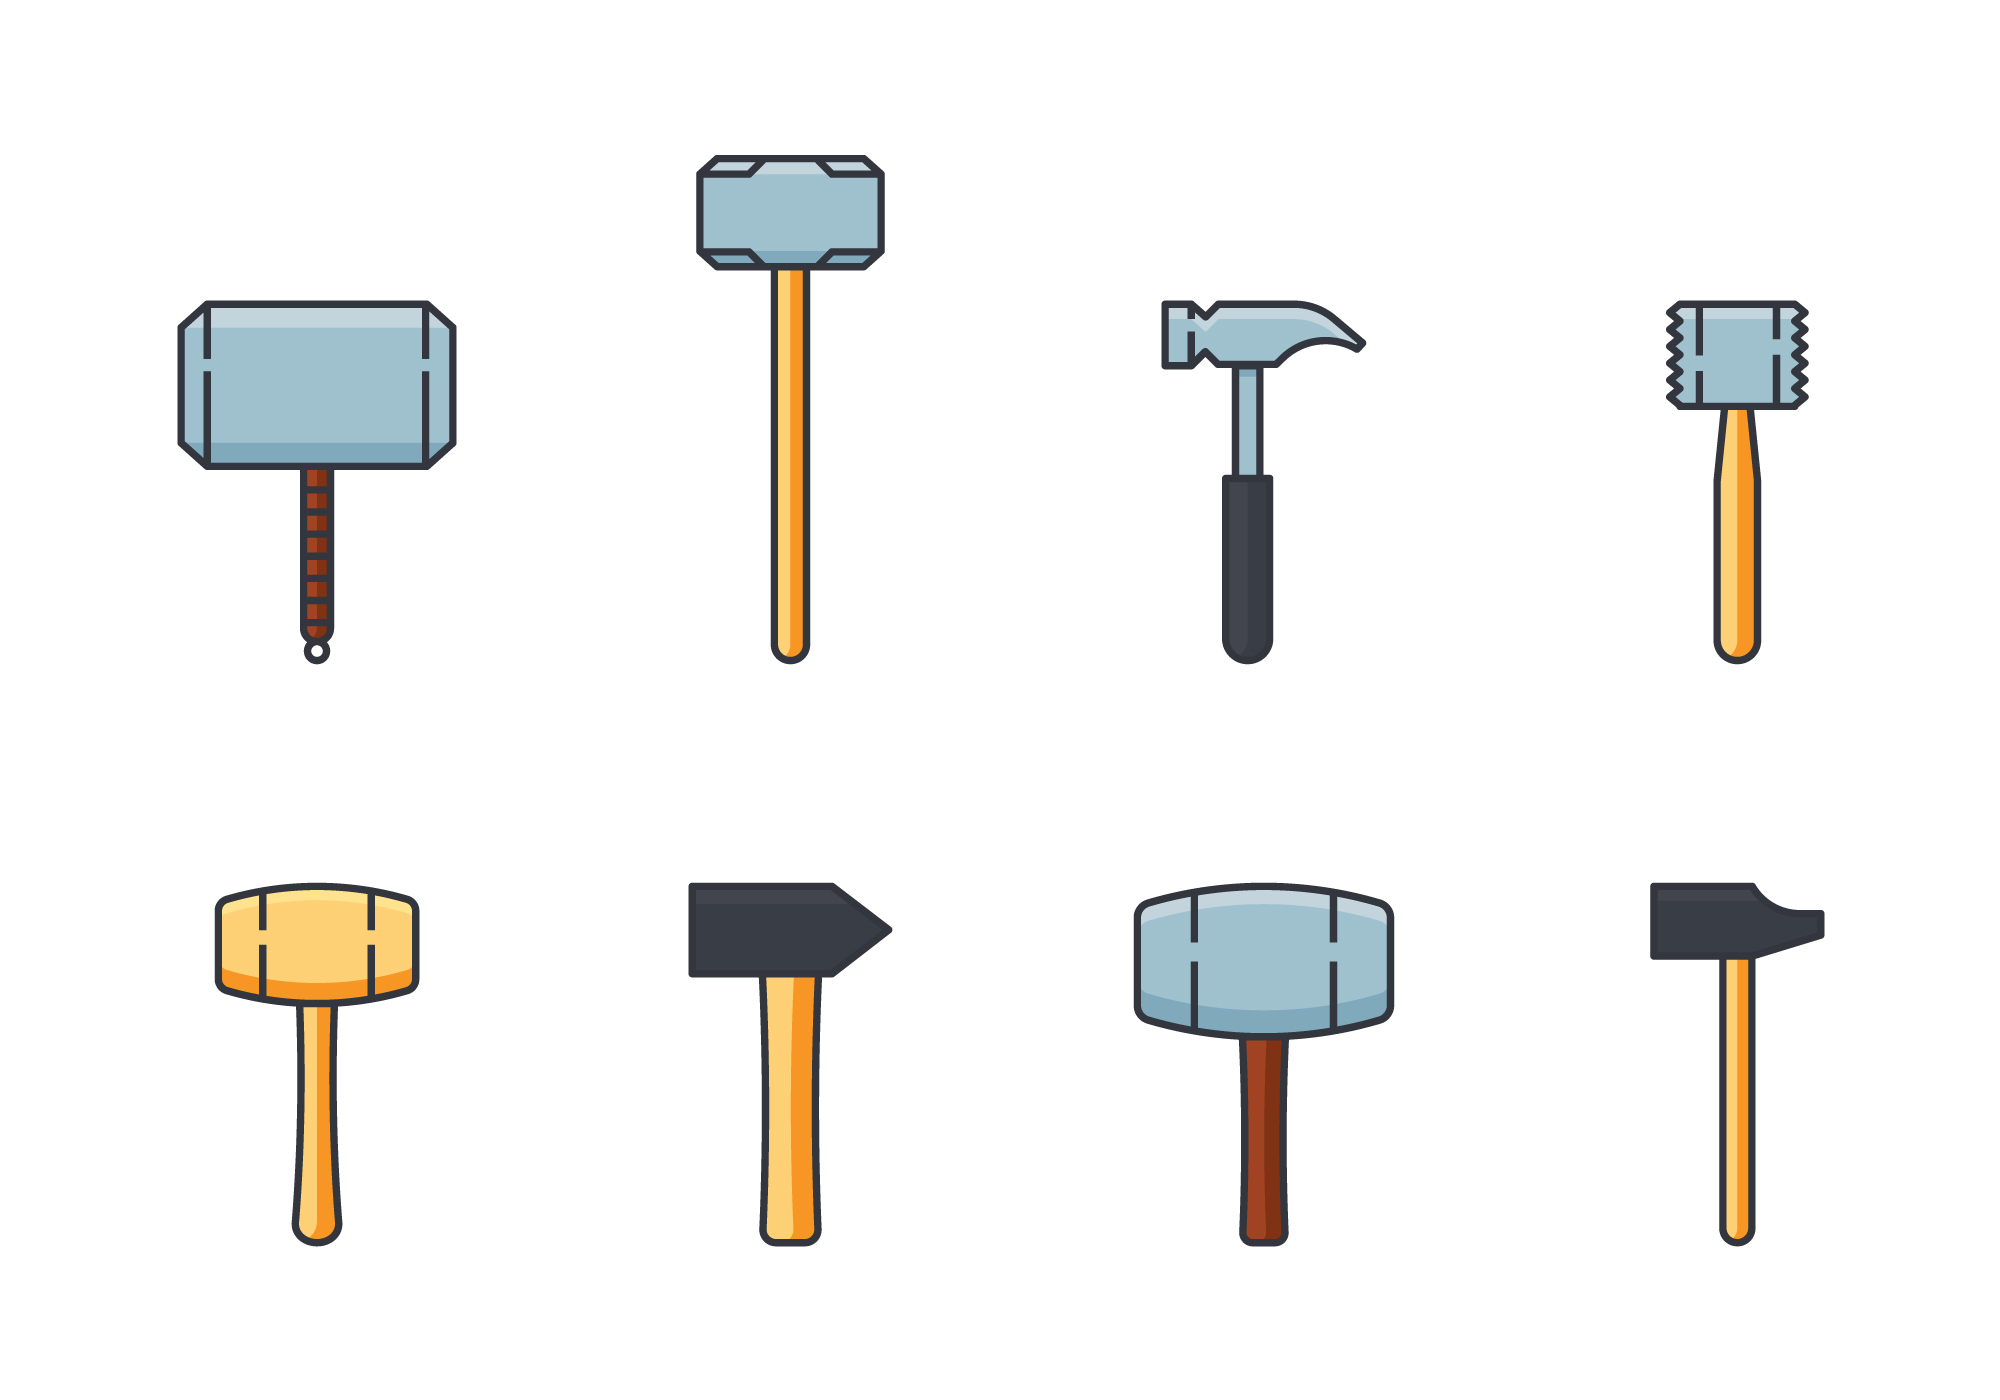 Free Hammer Clipart design technology tool, Download Free